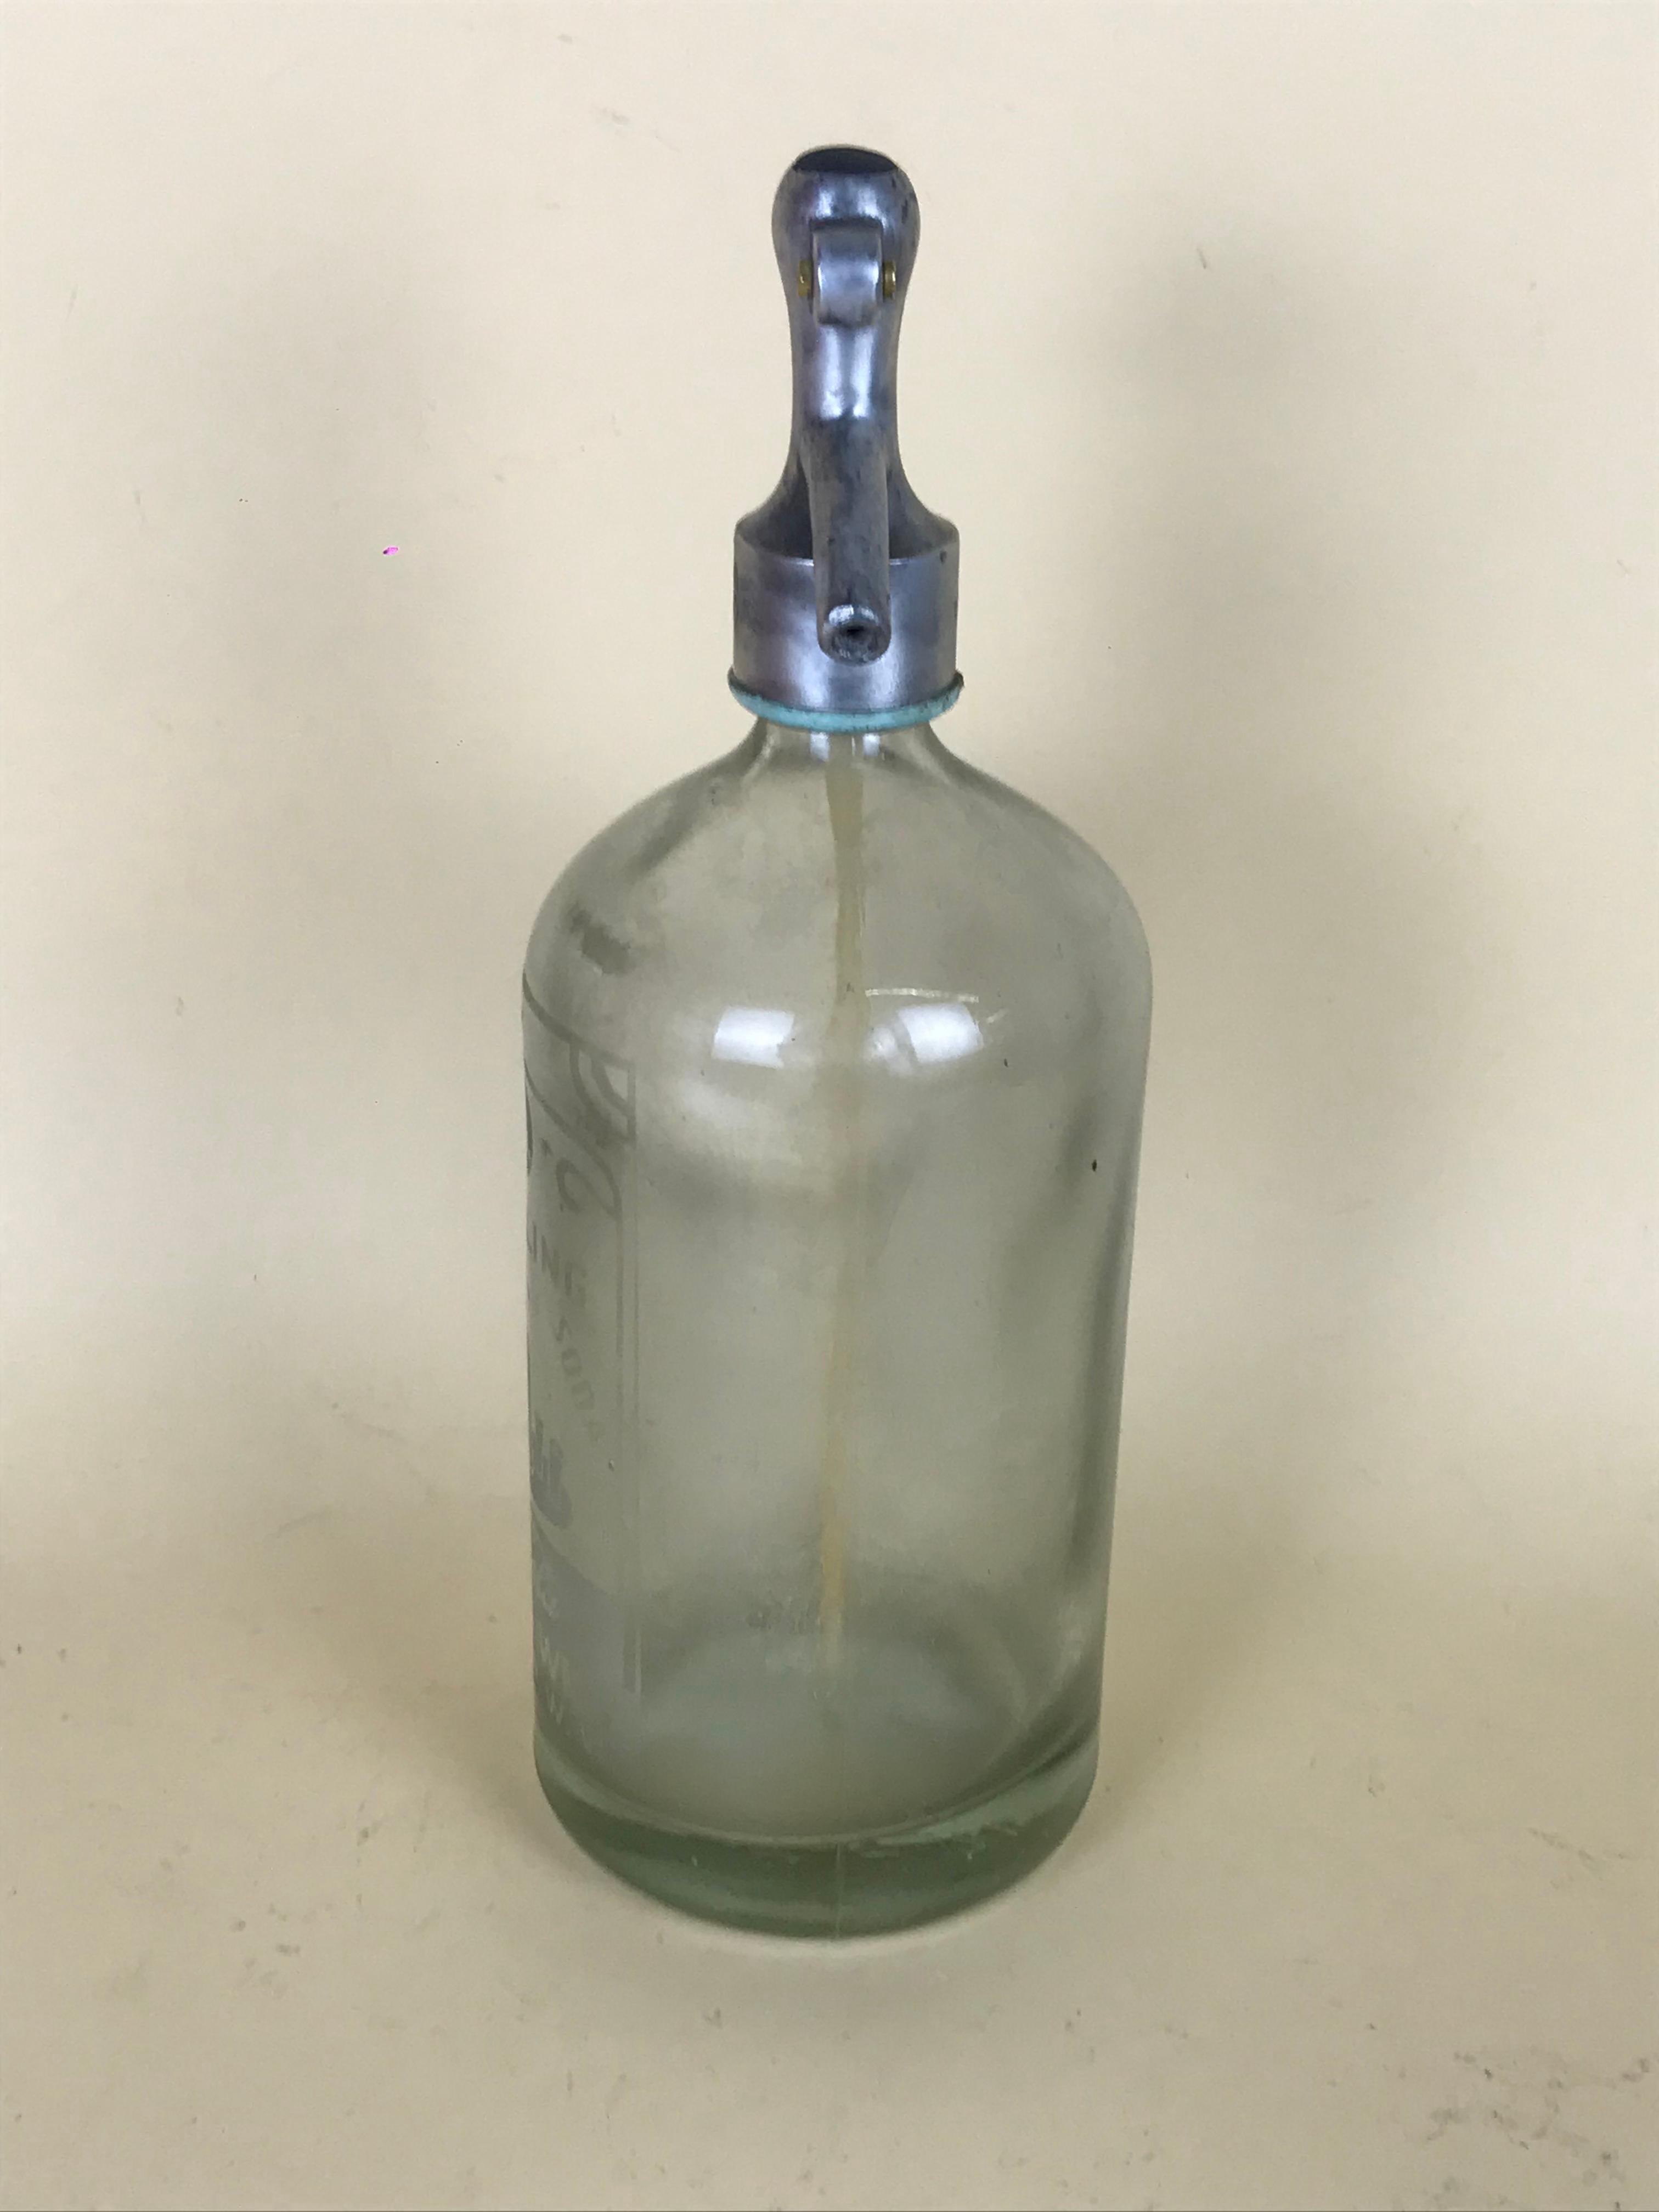 1920s American Advertising Glass Syphon Coca-Cola Acid Etched Bar Bottle Seltzer For Sale 3